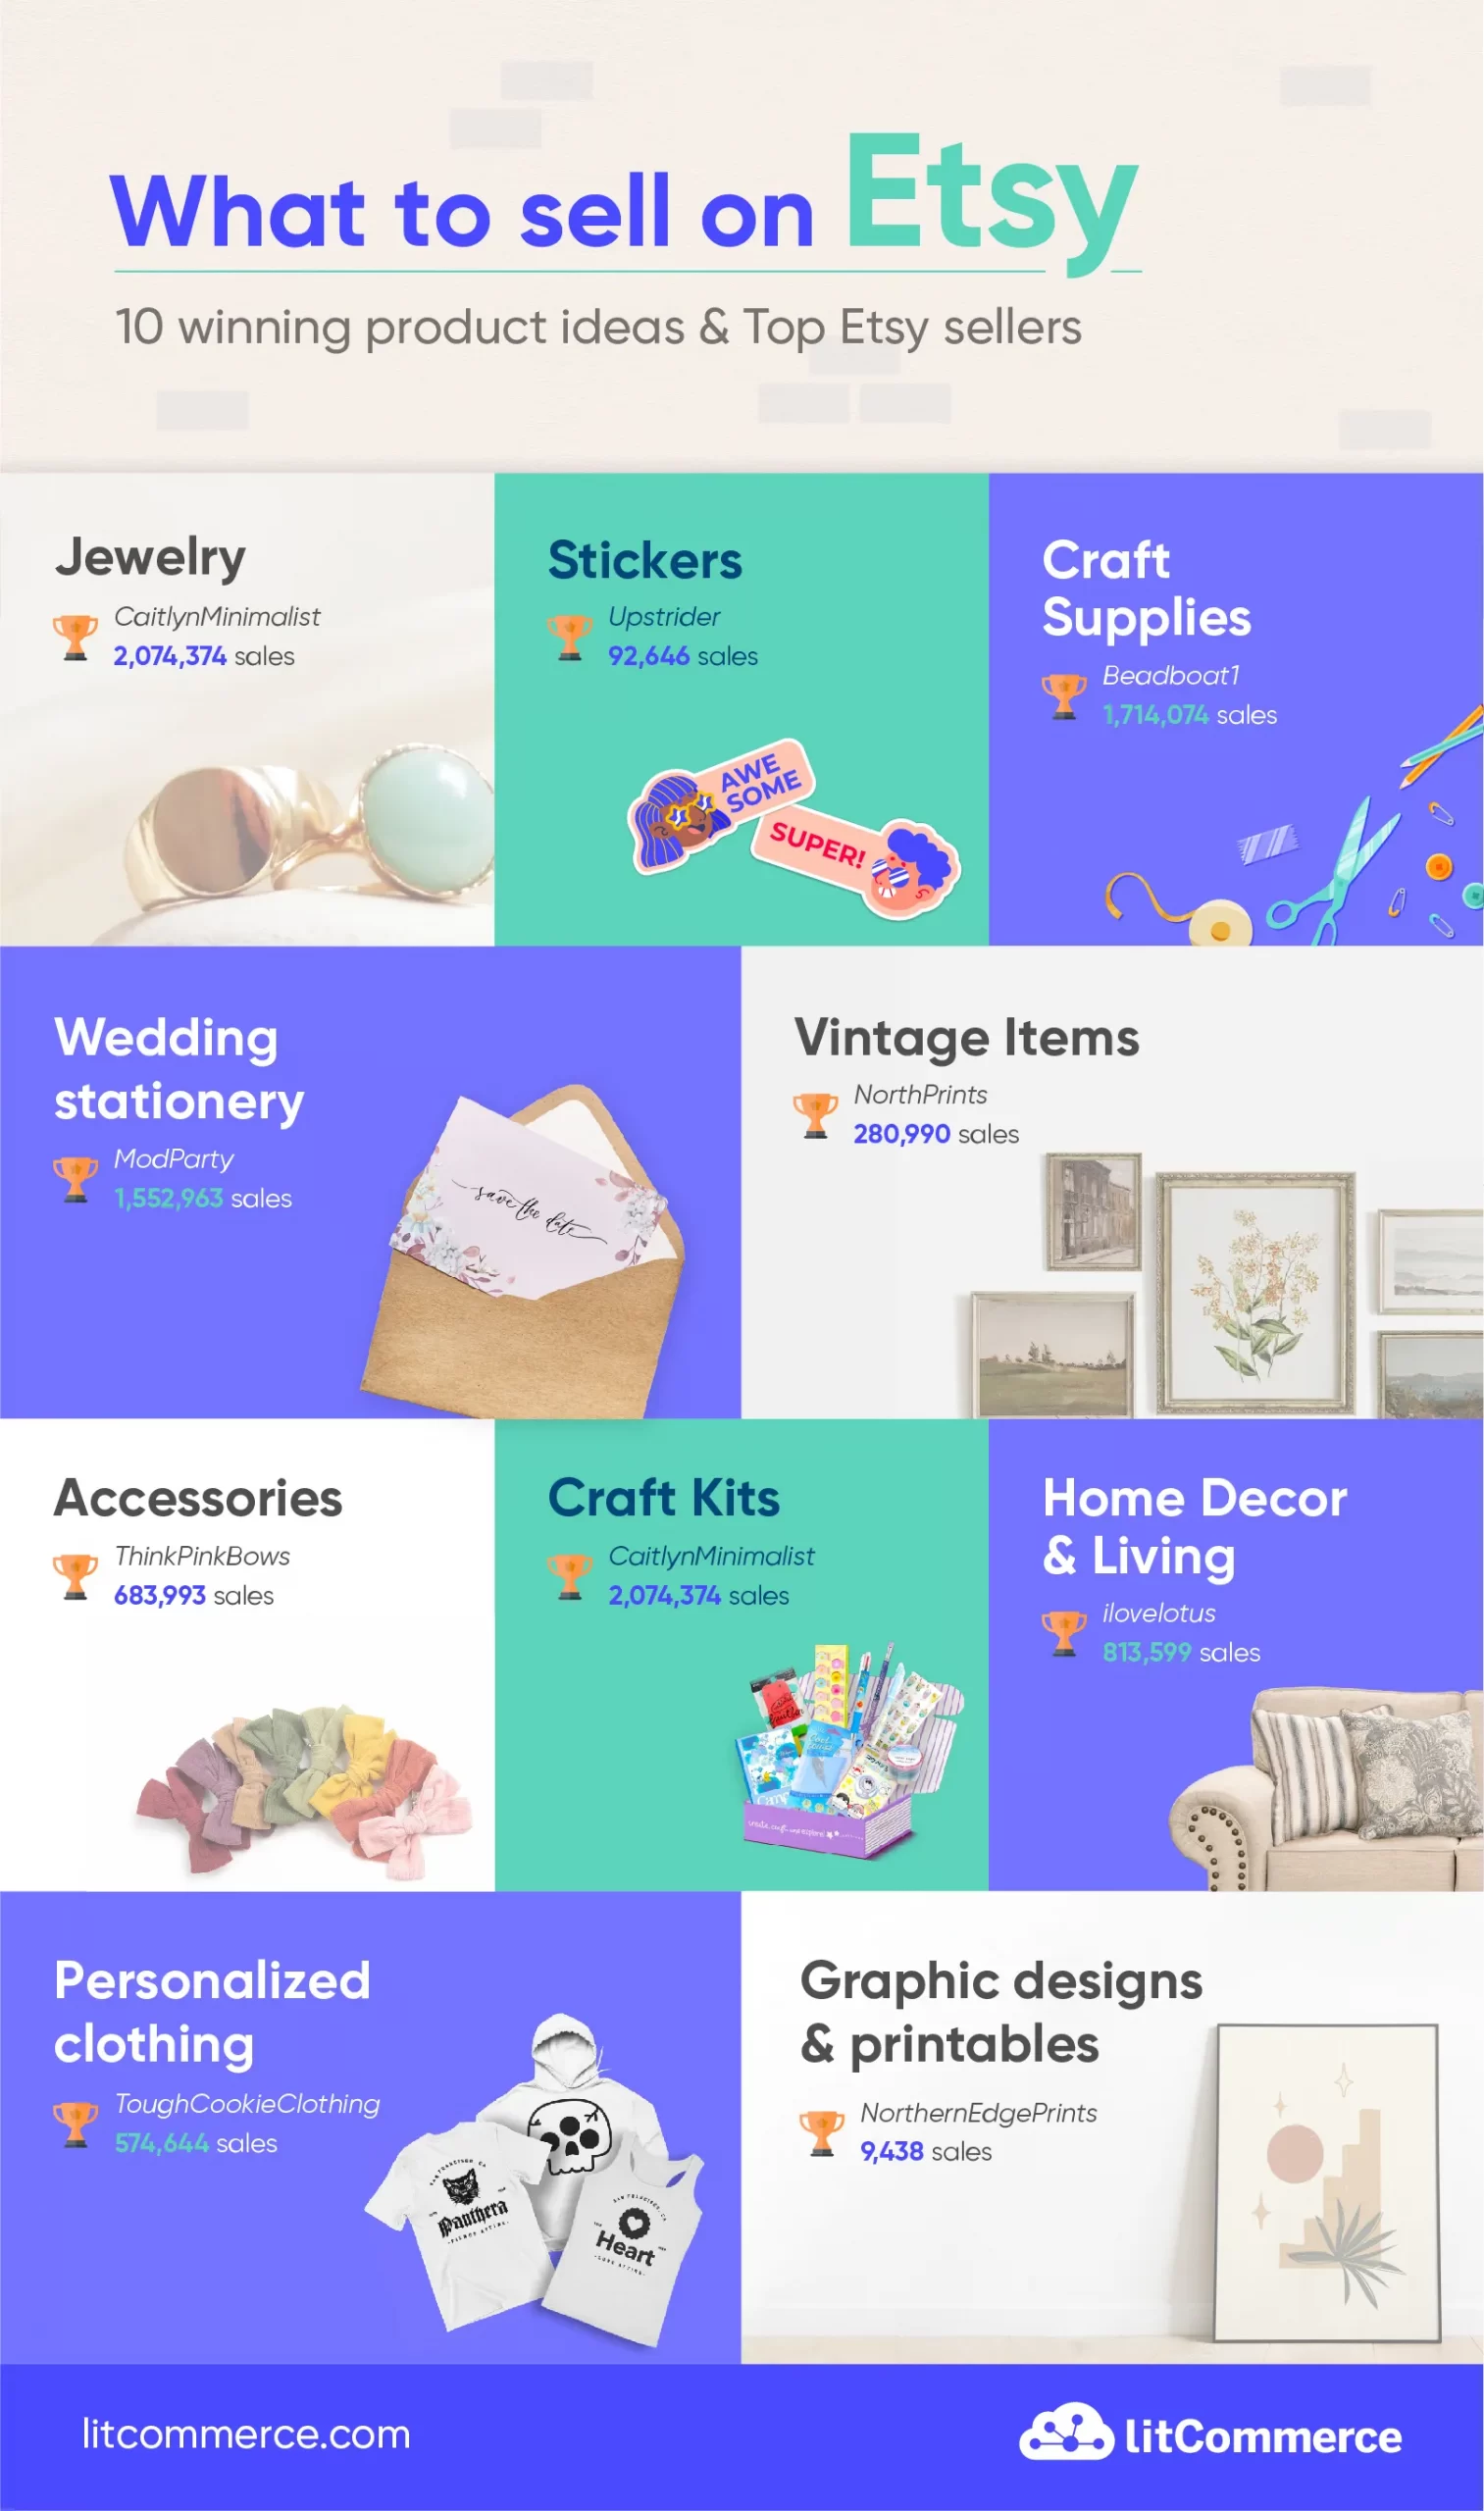 10 Best selling items on Etsy and Top Etsy sellers infographic by LitCommerce